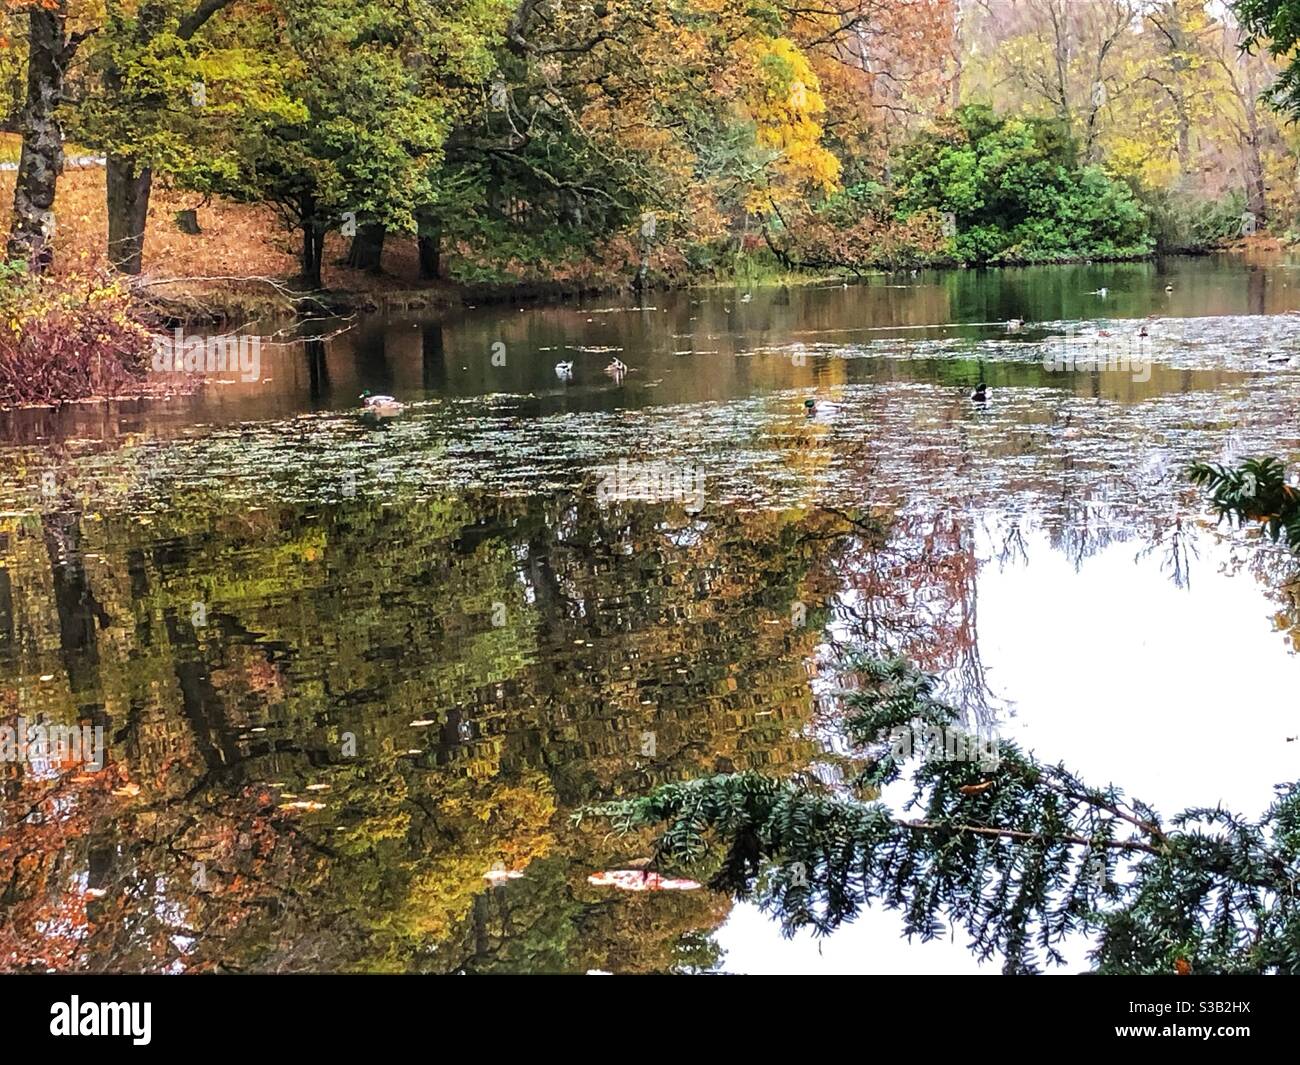 Lake in the Autumn woods at Crathes castle, Aberdeenshire Stock Photo